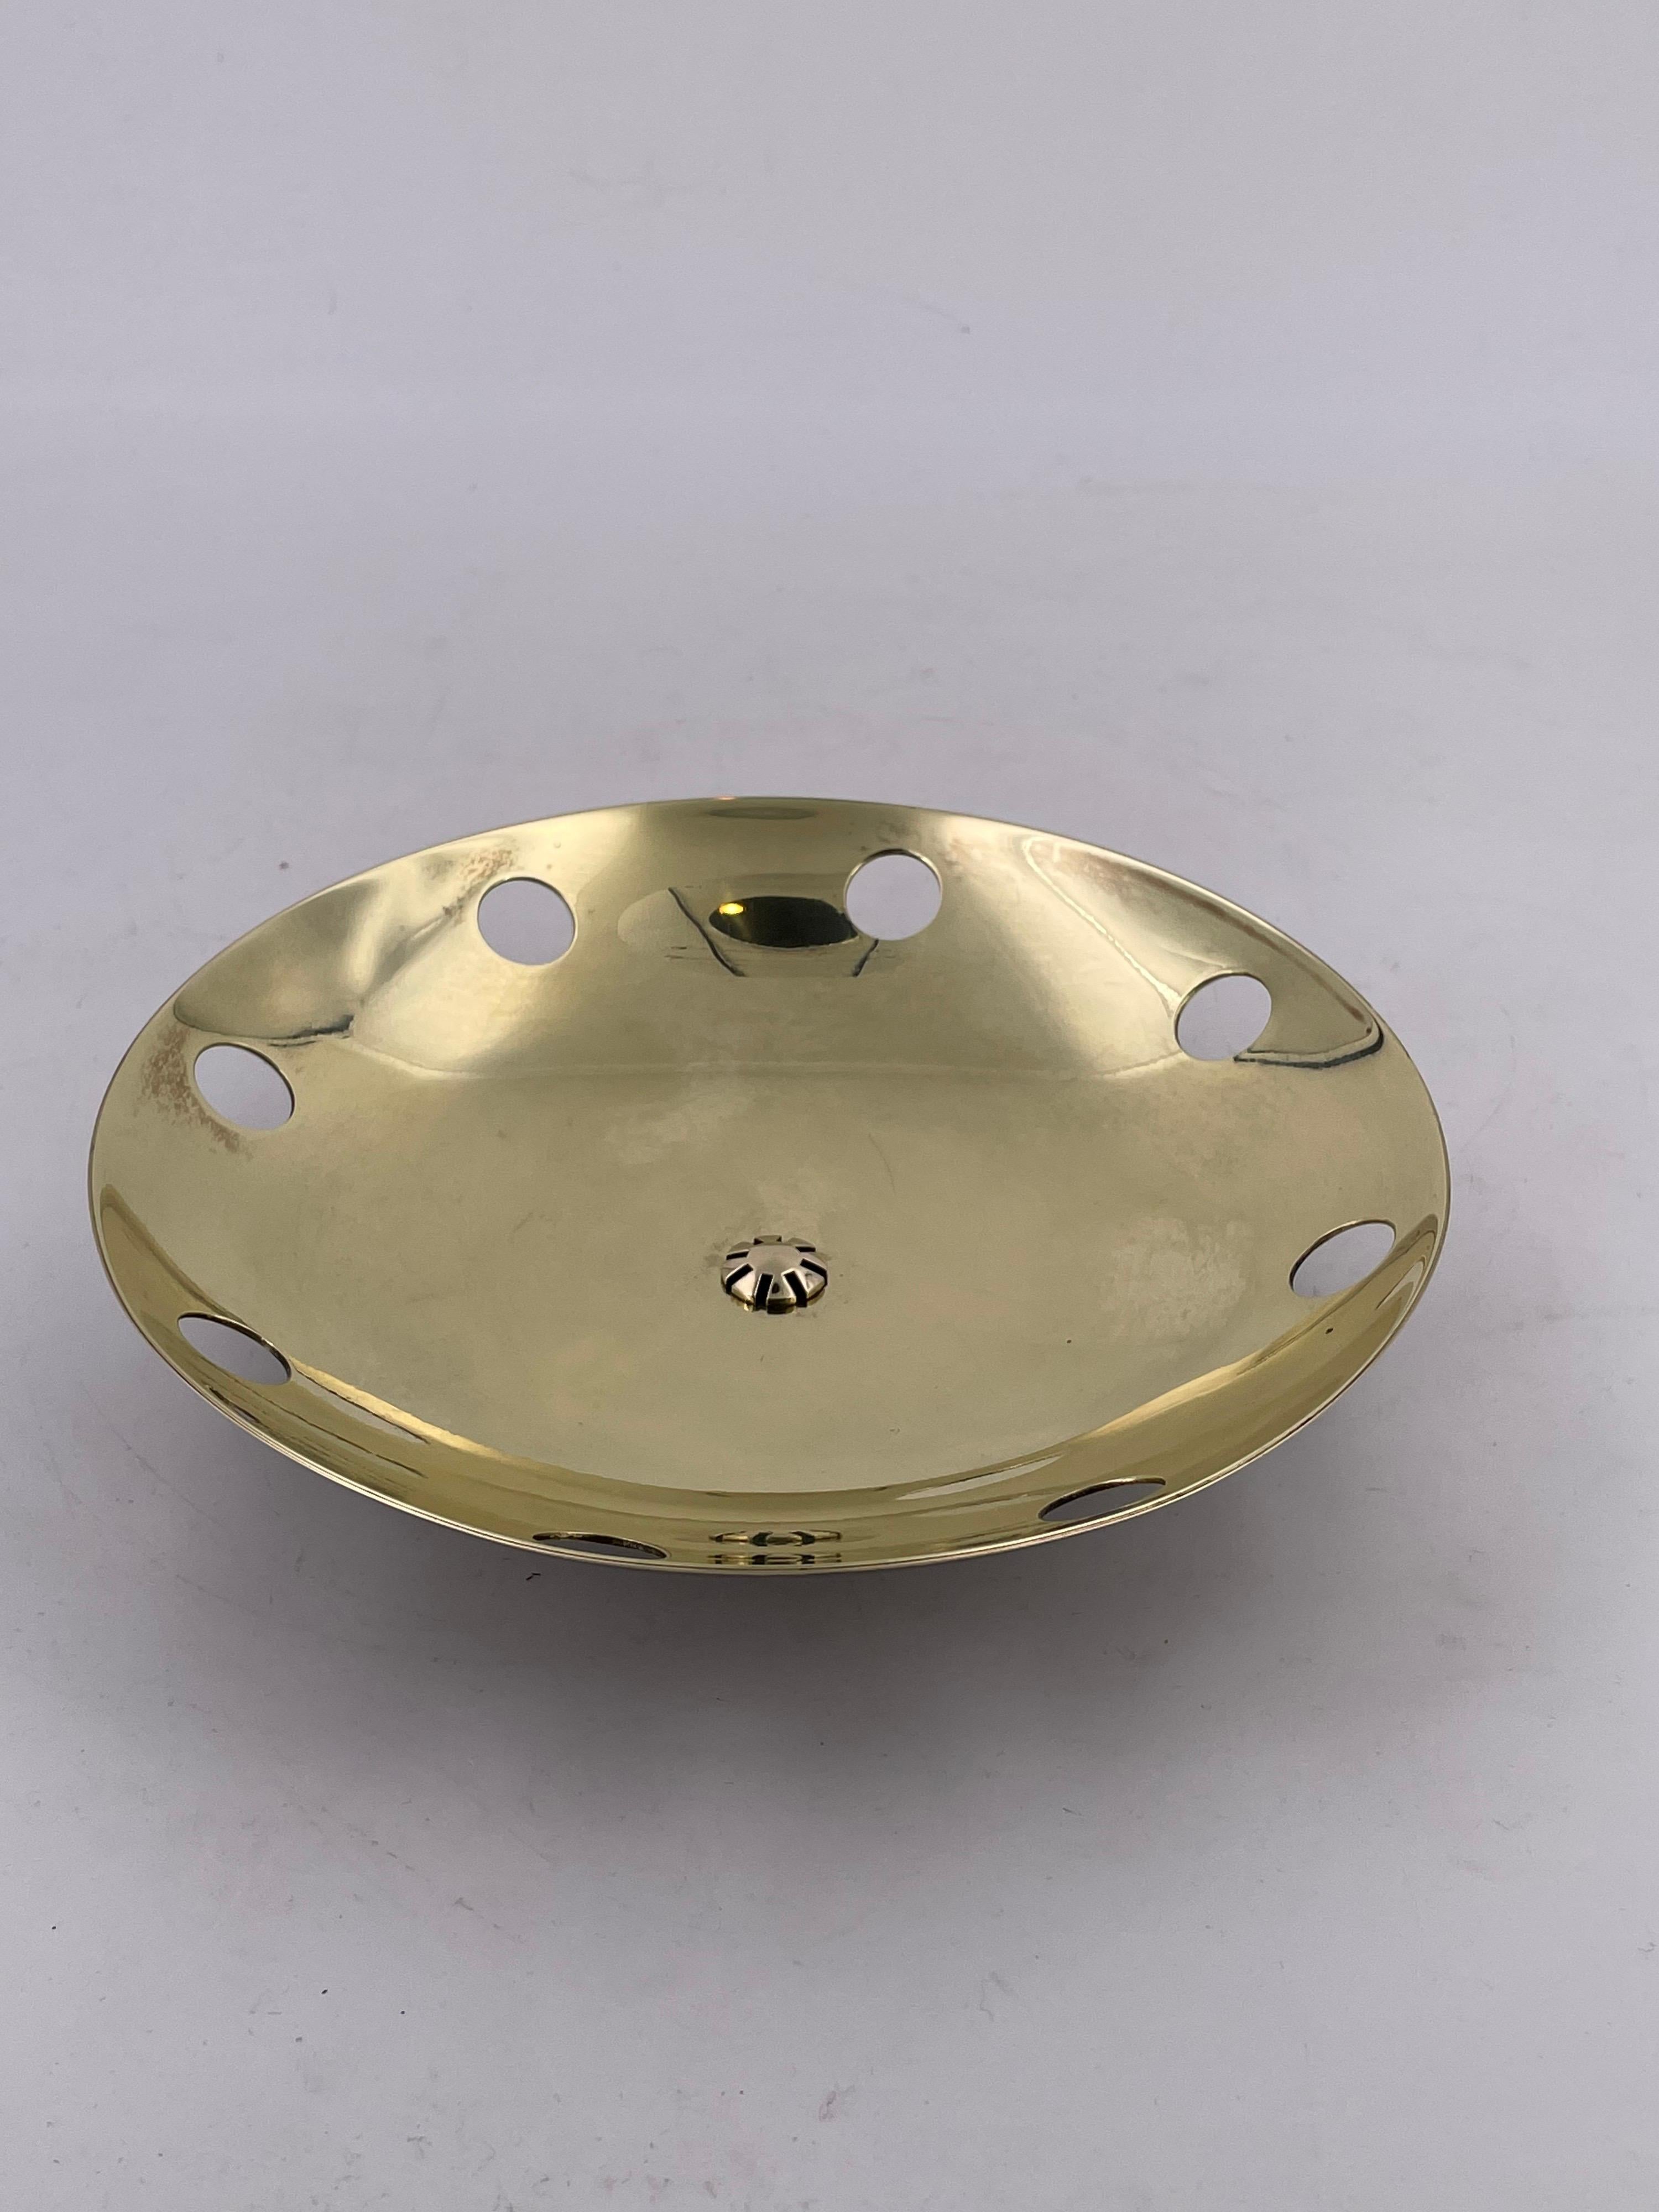 American Midcentury Atomic Age Solid Brass Low Bowl In Good Condition For Sale In San Diego, CA